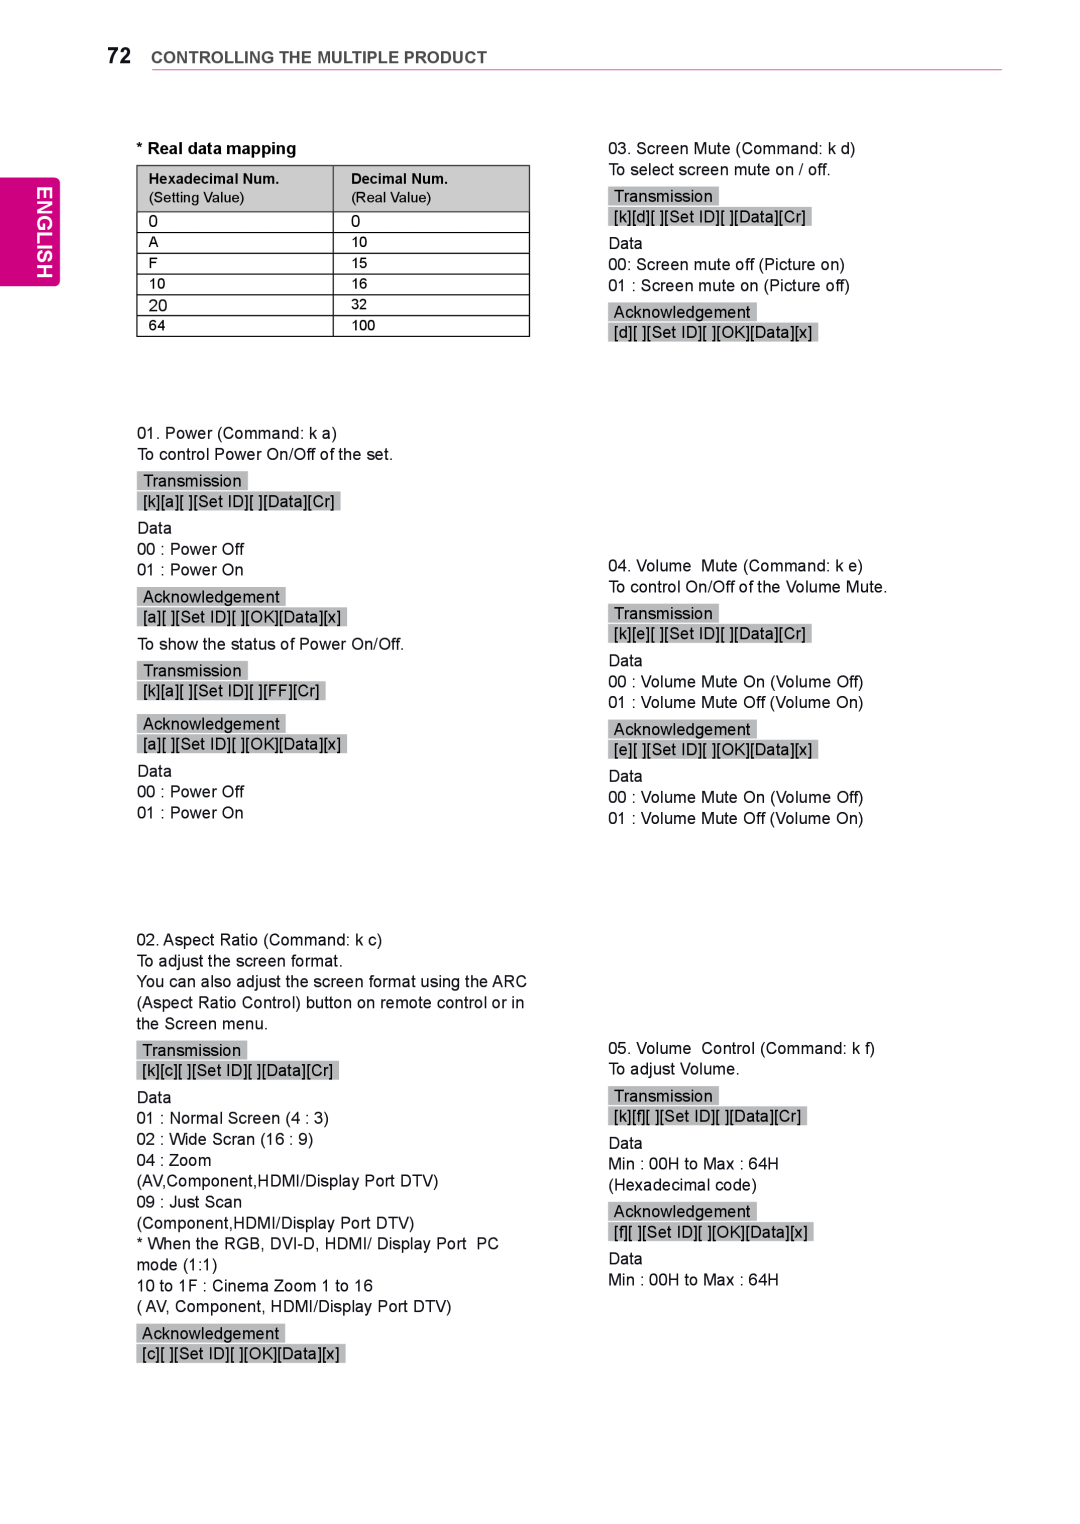 LG Electronics 42WS10, 47WS10, 55WS10 owner manual English, Controlling The Multiple Product, Real data mapping 